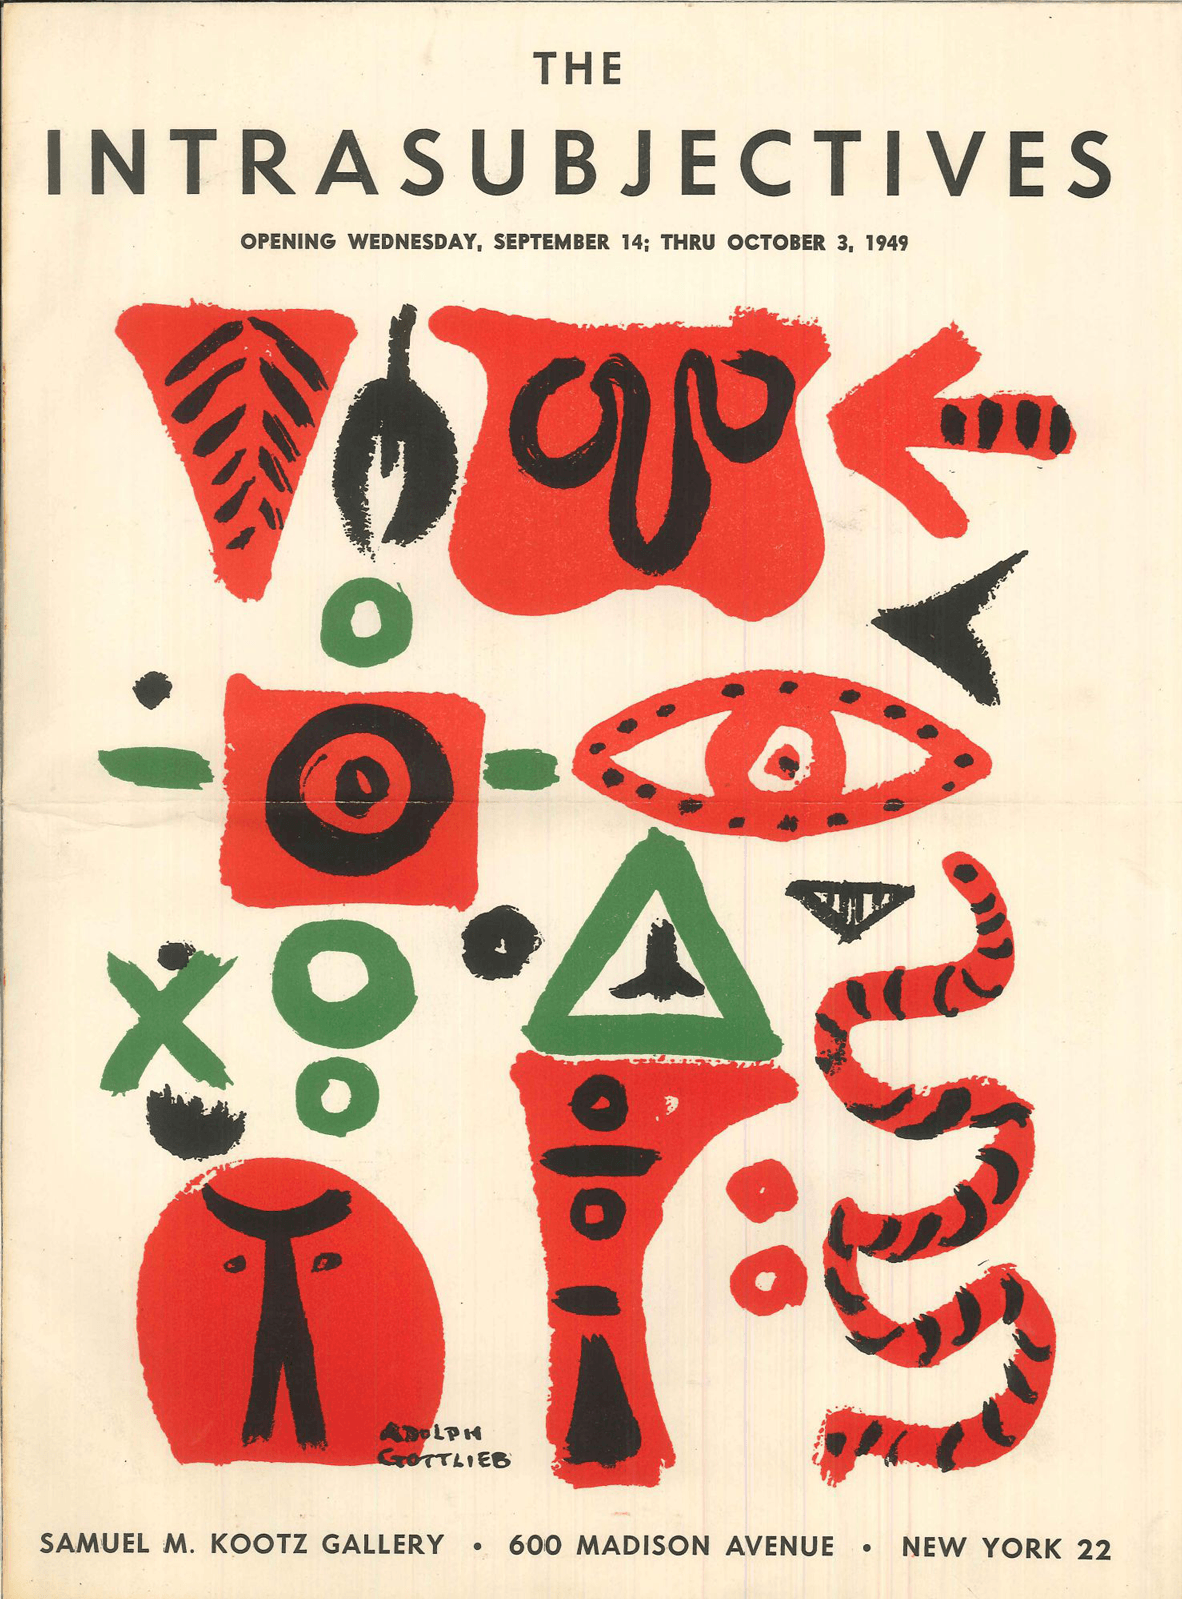 Catalogue for The Intrasubjectives, 1949. Features black text and green, red, and black designs painted by Adolph Gottlieb on a white backgroud.